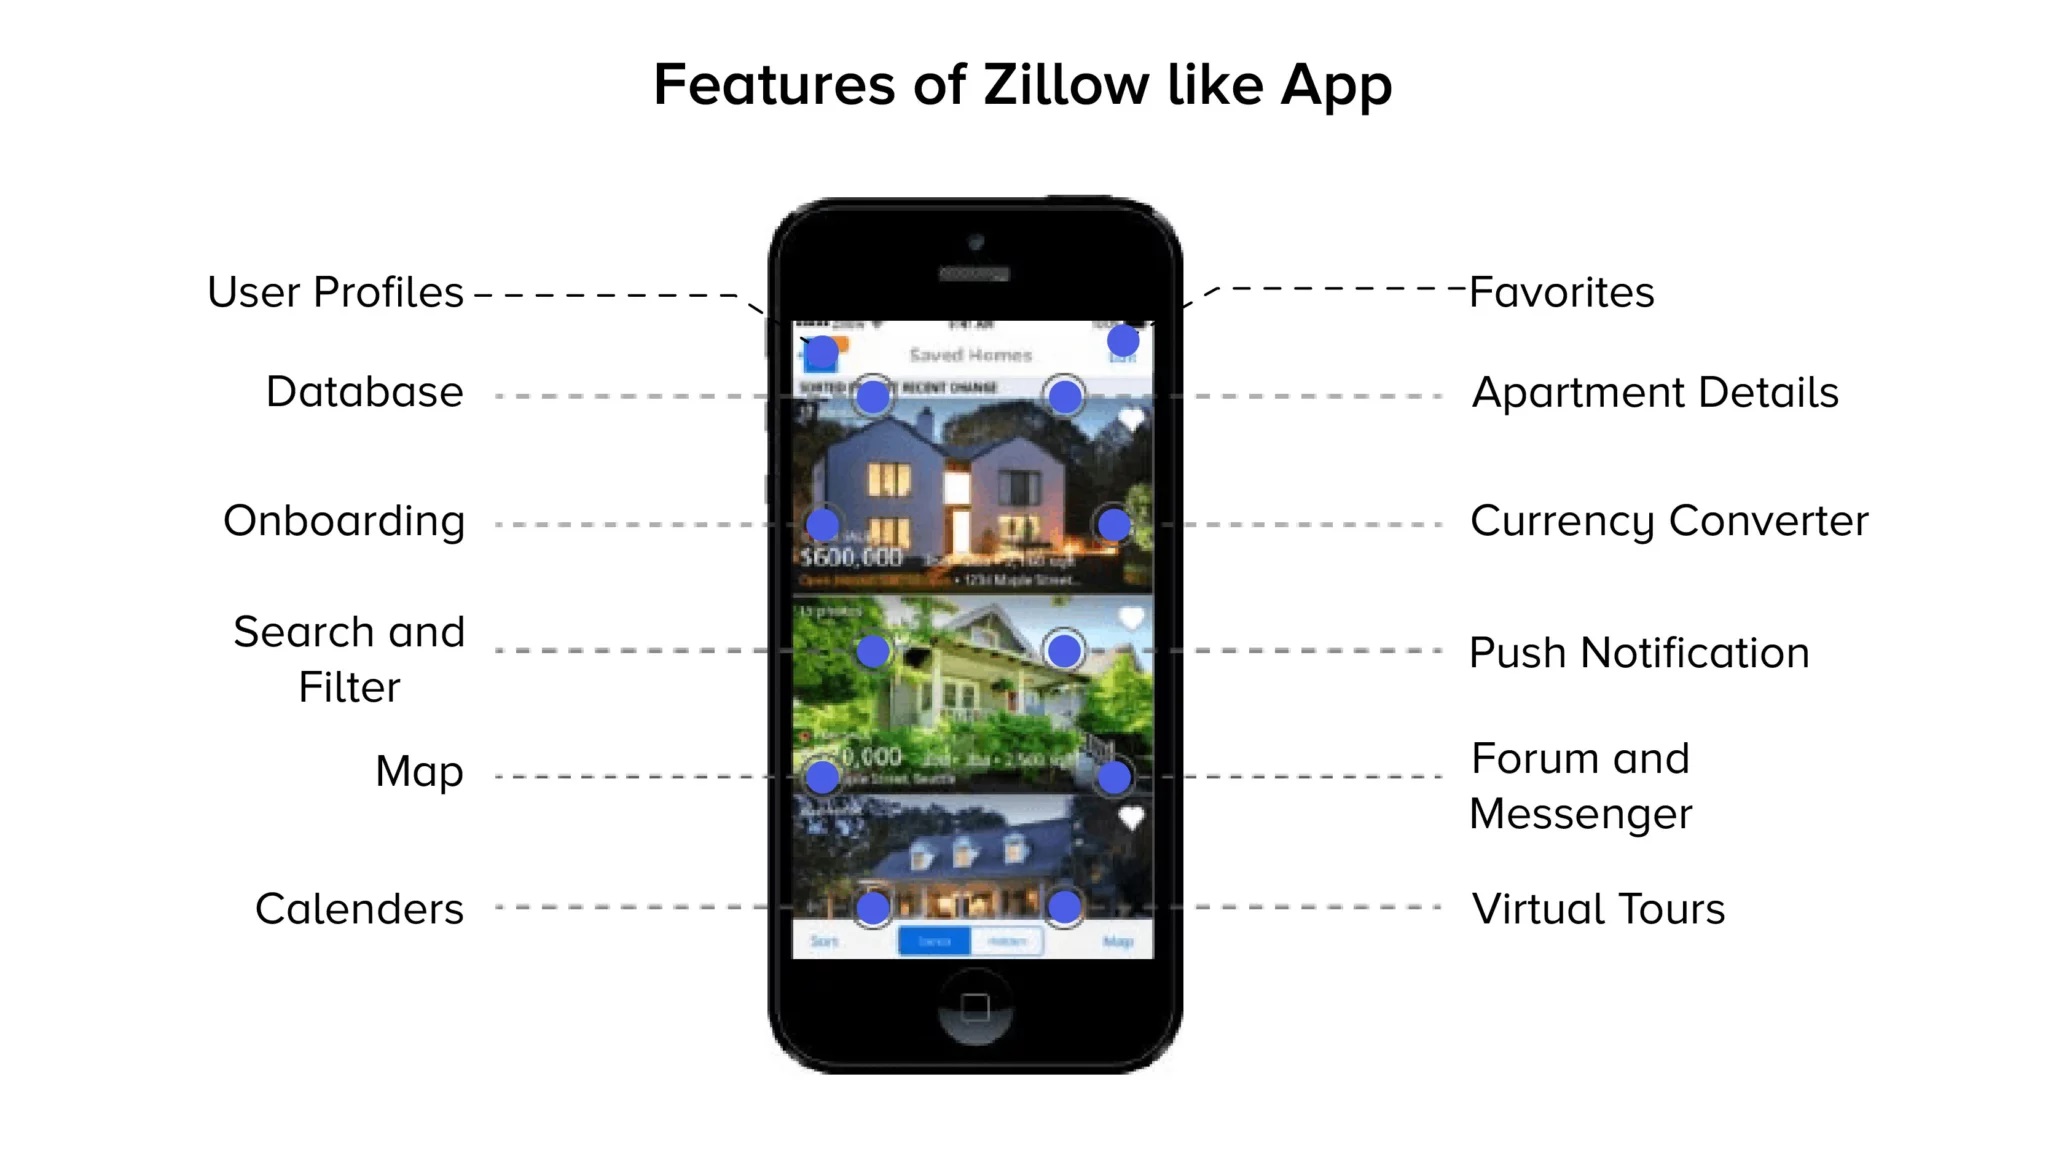 Features of Real Estate Apps Like Zillow